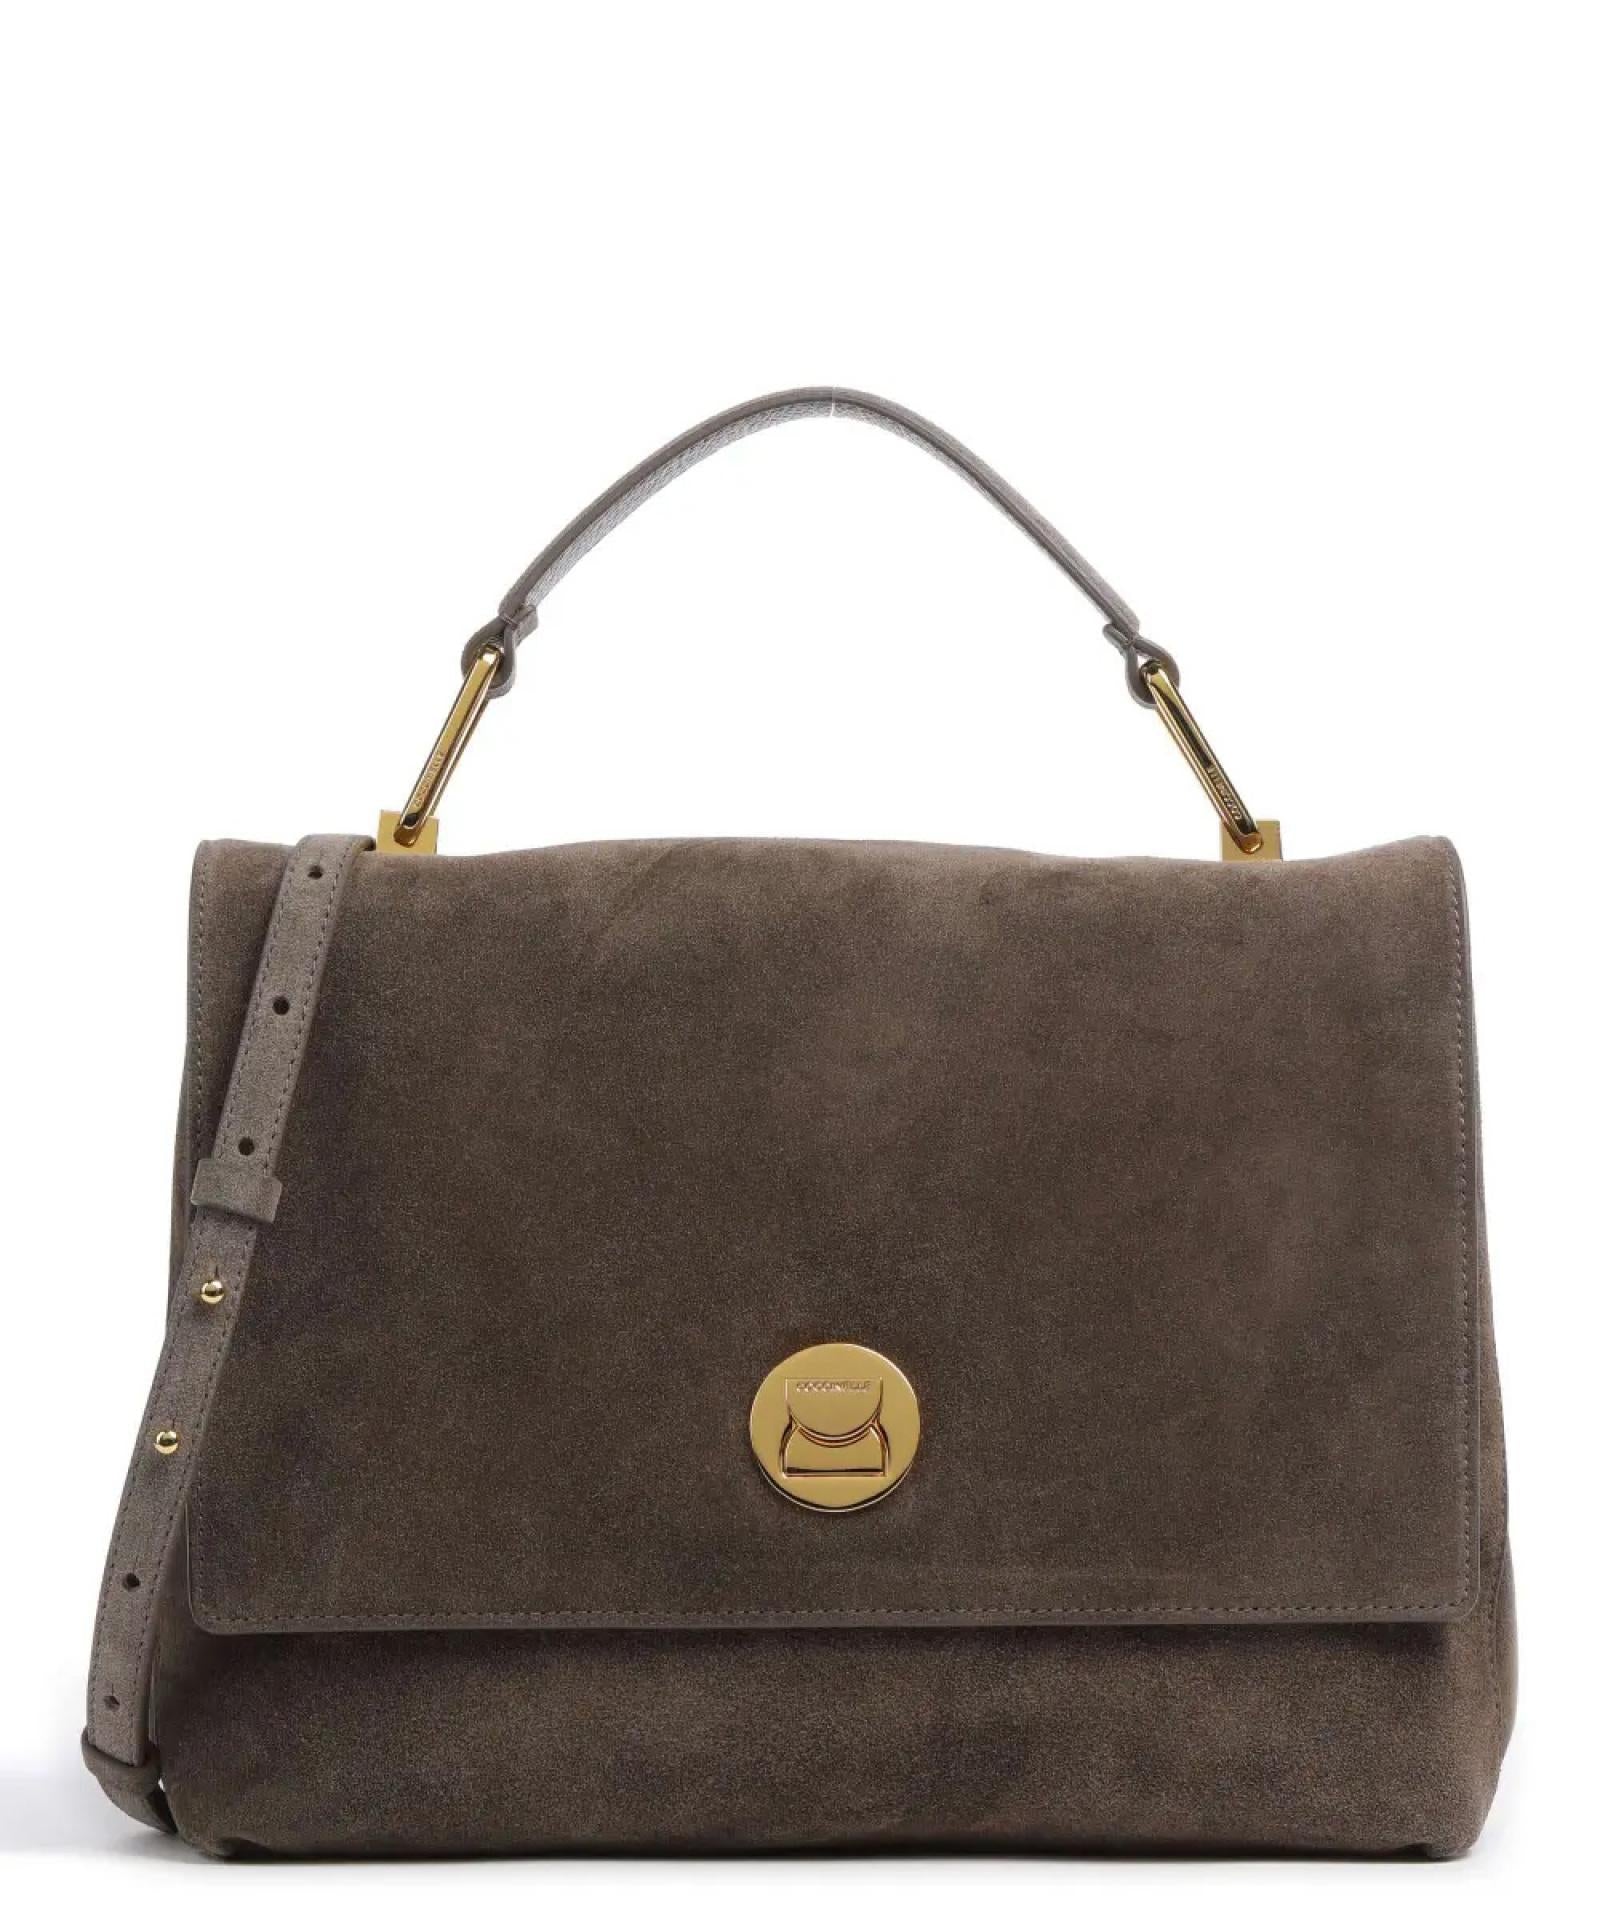 Coccinelle HANDBAG SUEDE LEATHER/LGRAINED LEAT. / COFFEE/COFFEE